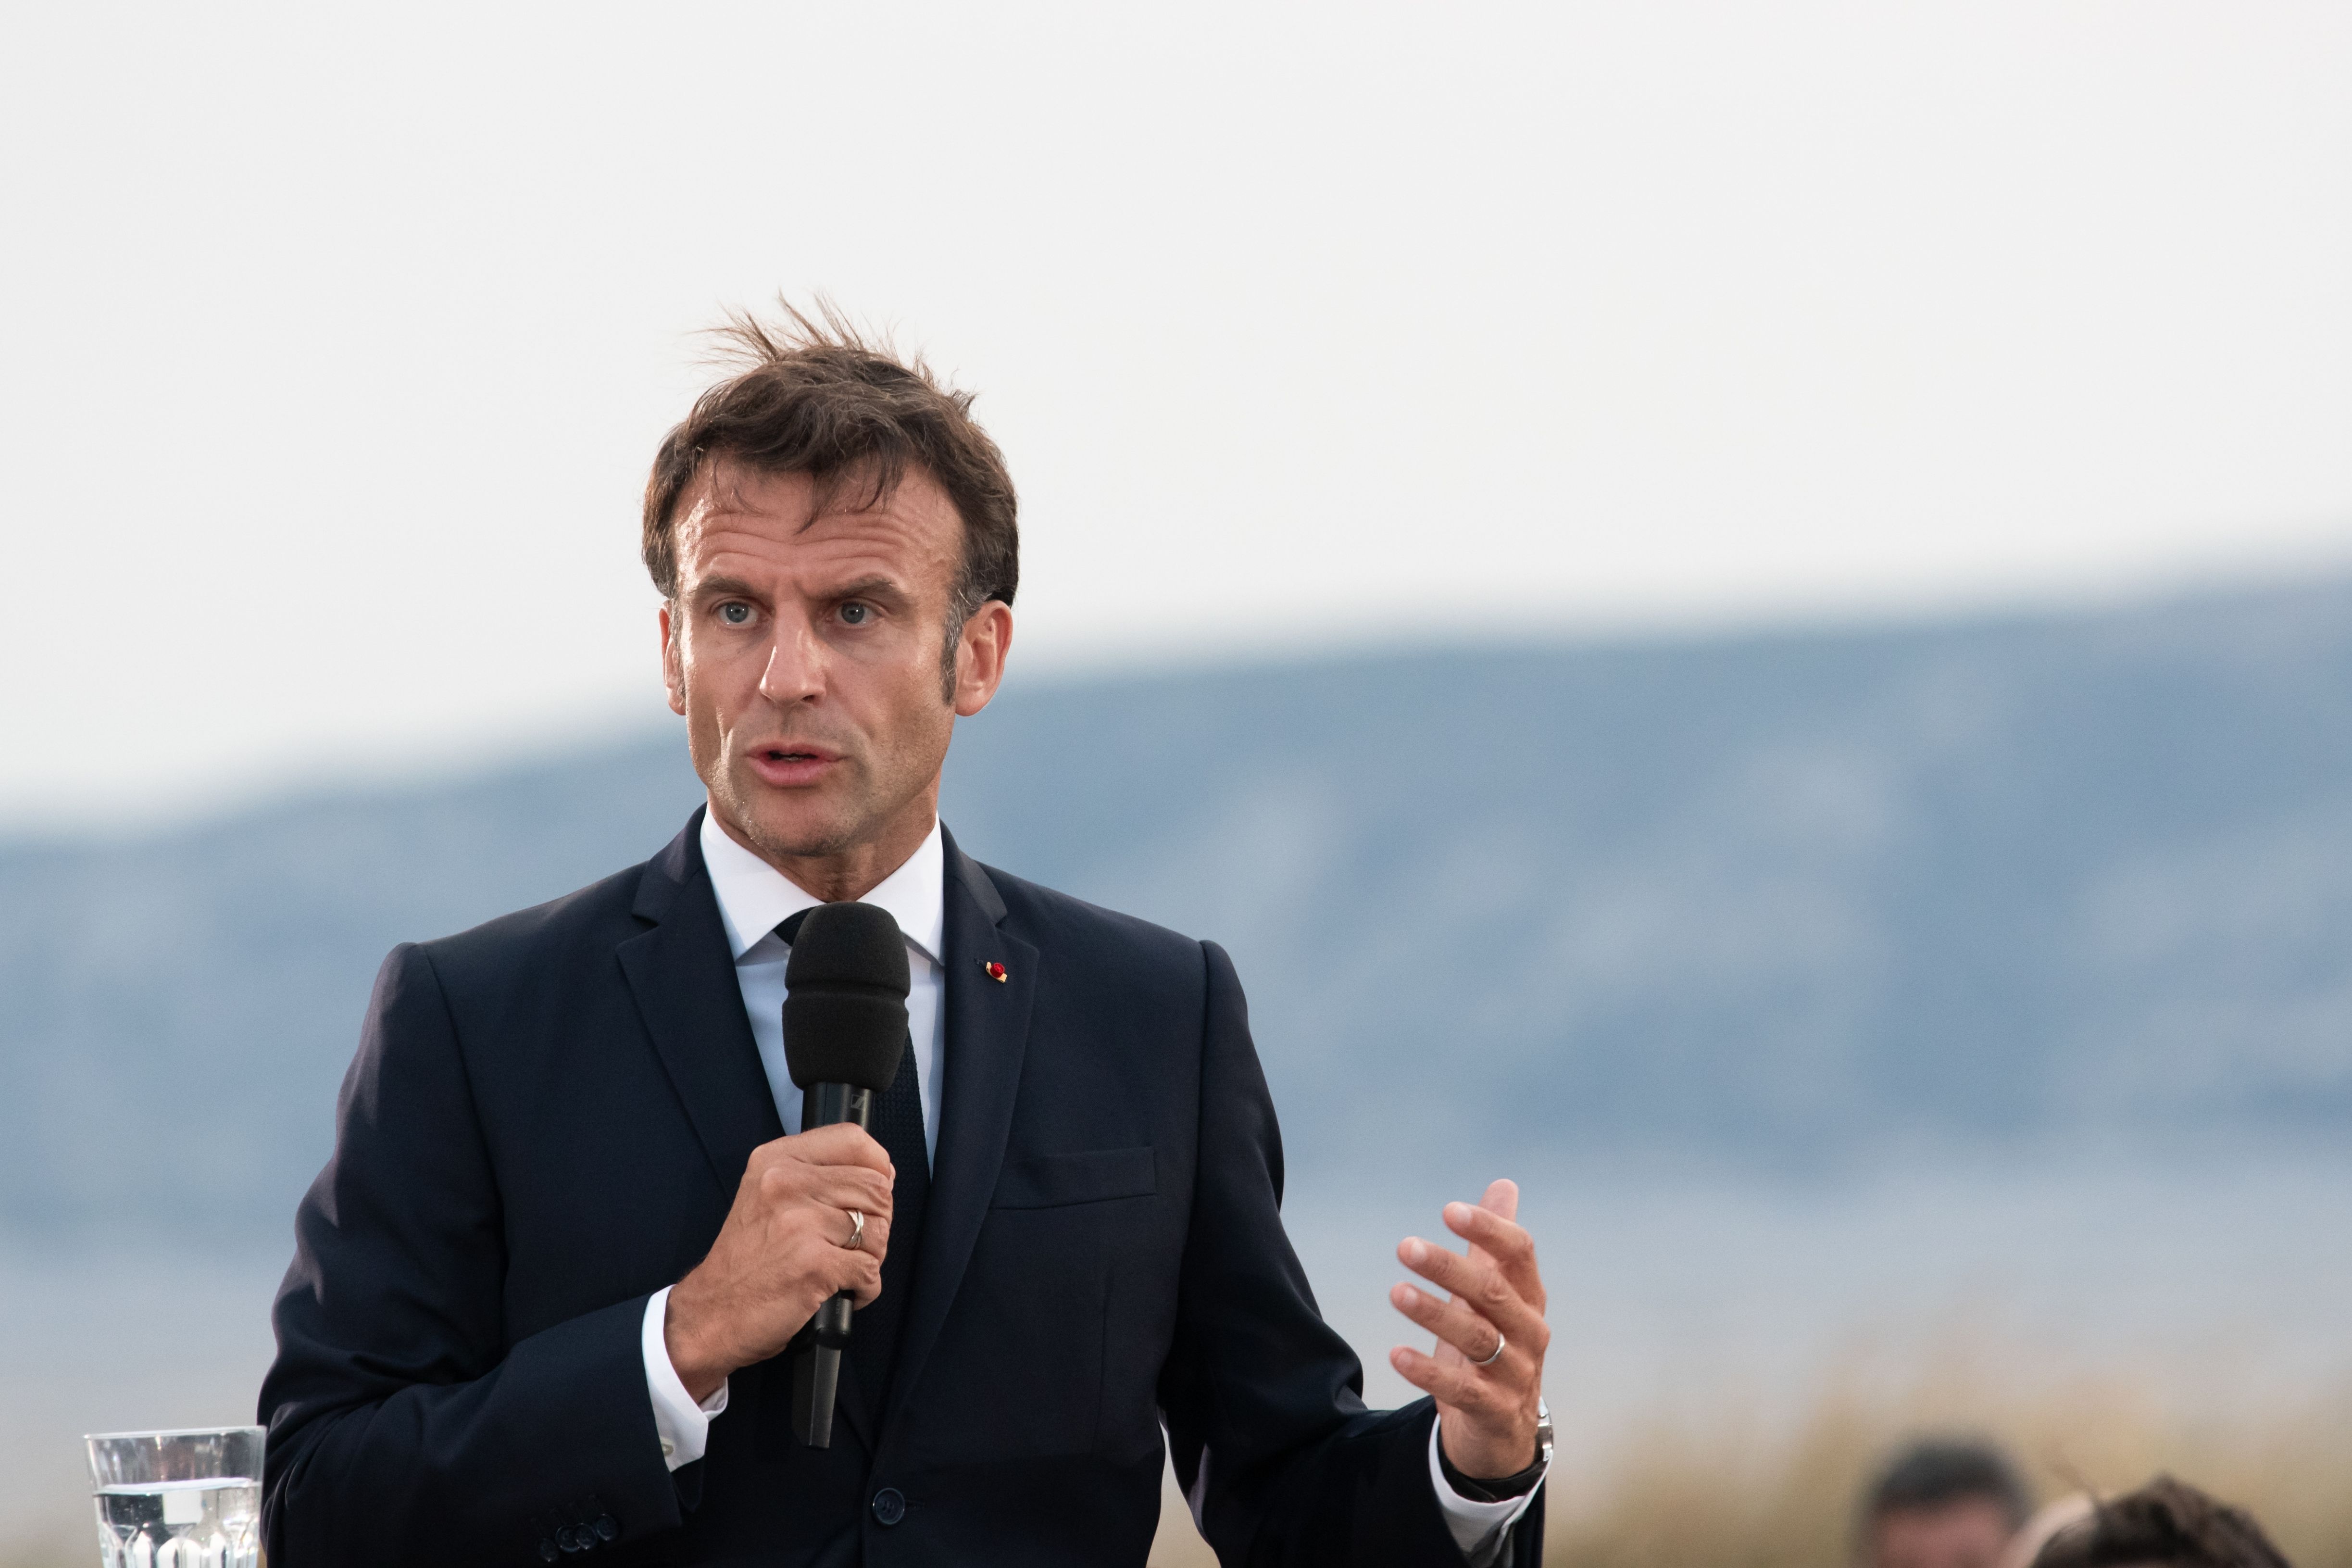 Marseille, France - 27-05-2023: Emmanuel Macron delivers a speech at Fort Saint Jean in Marseille, France, on 27 May 2023.